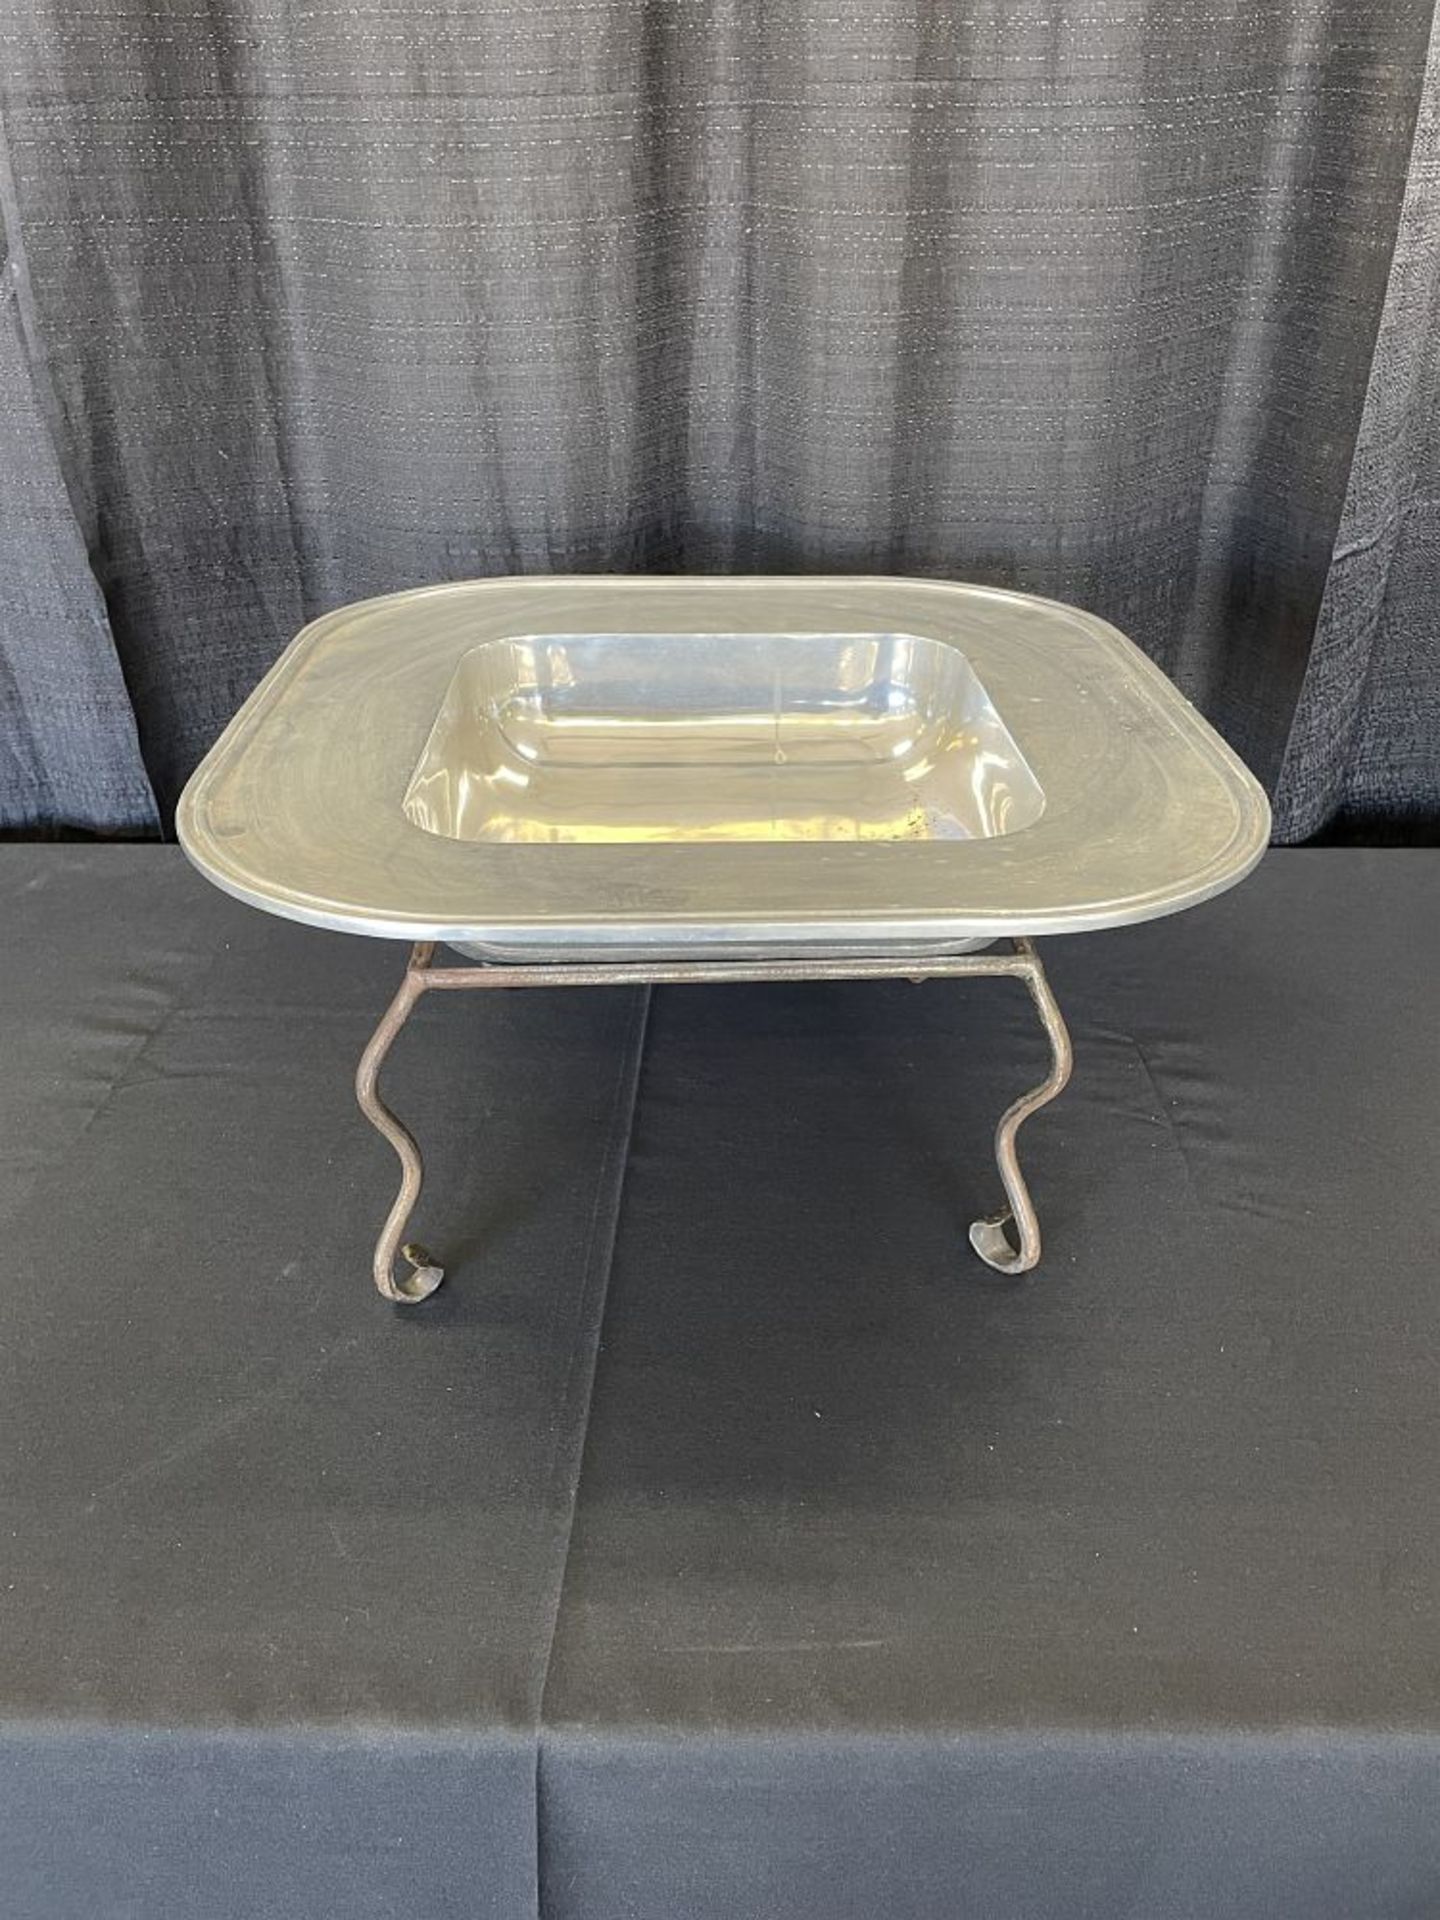 19" Square Metal Serving Tray on Stand